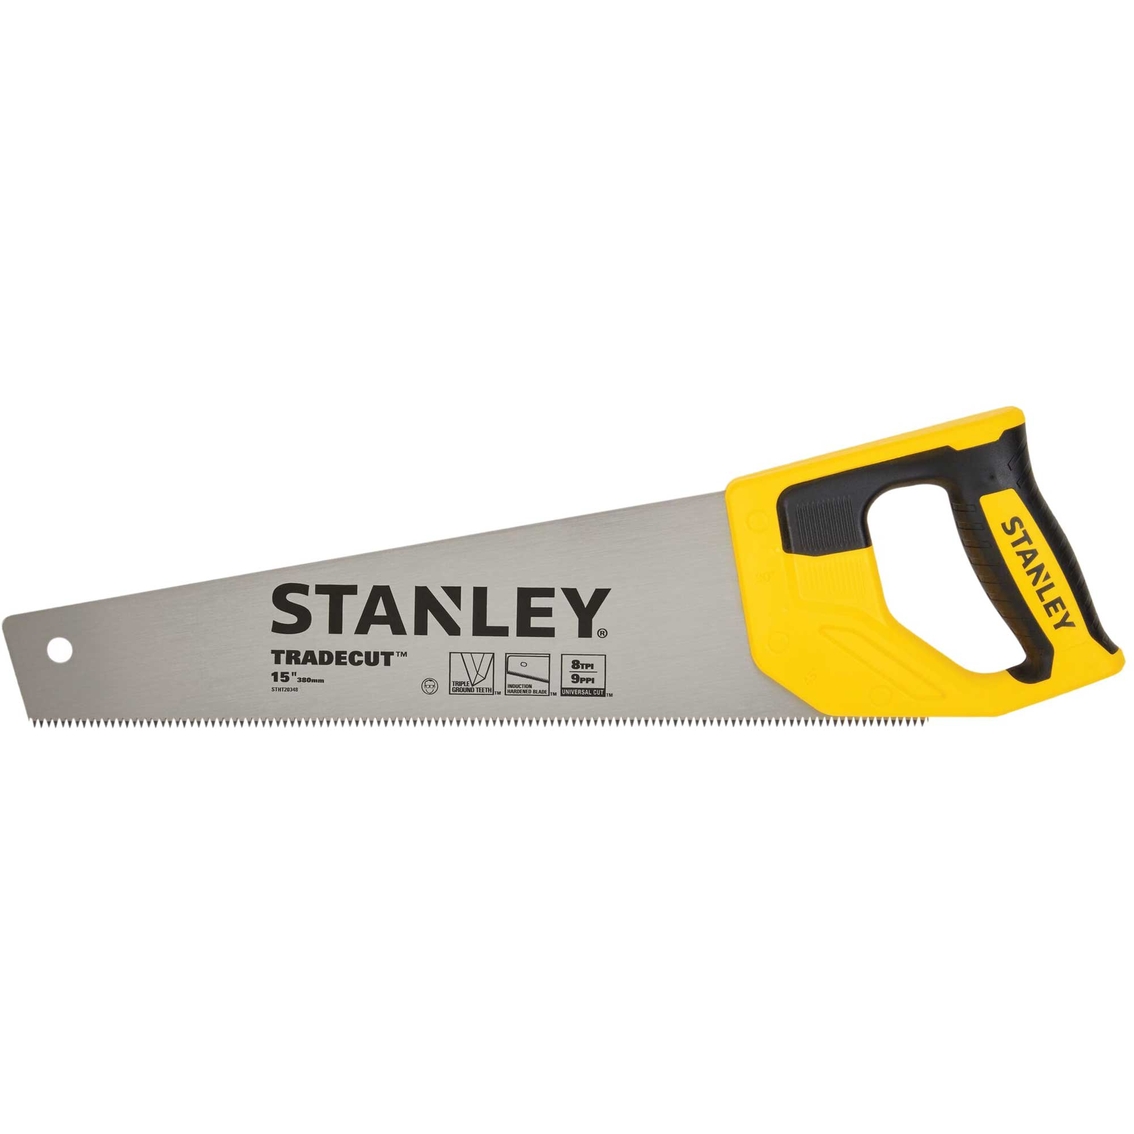 Stanley 15 in. TRADECUT Panel Saw - Image 2 of 4